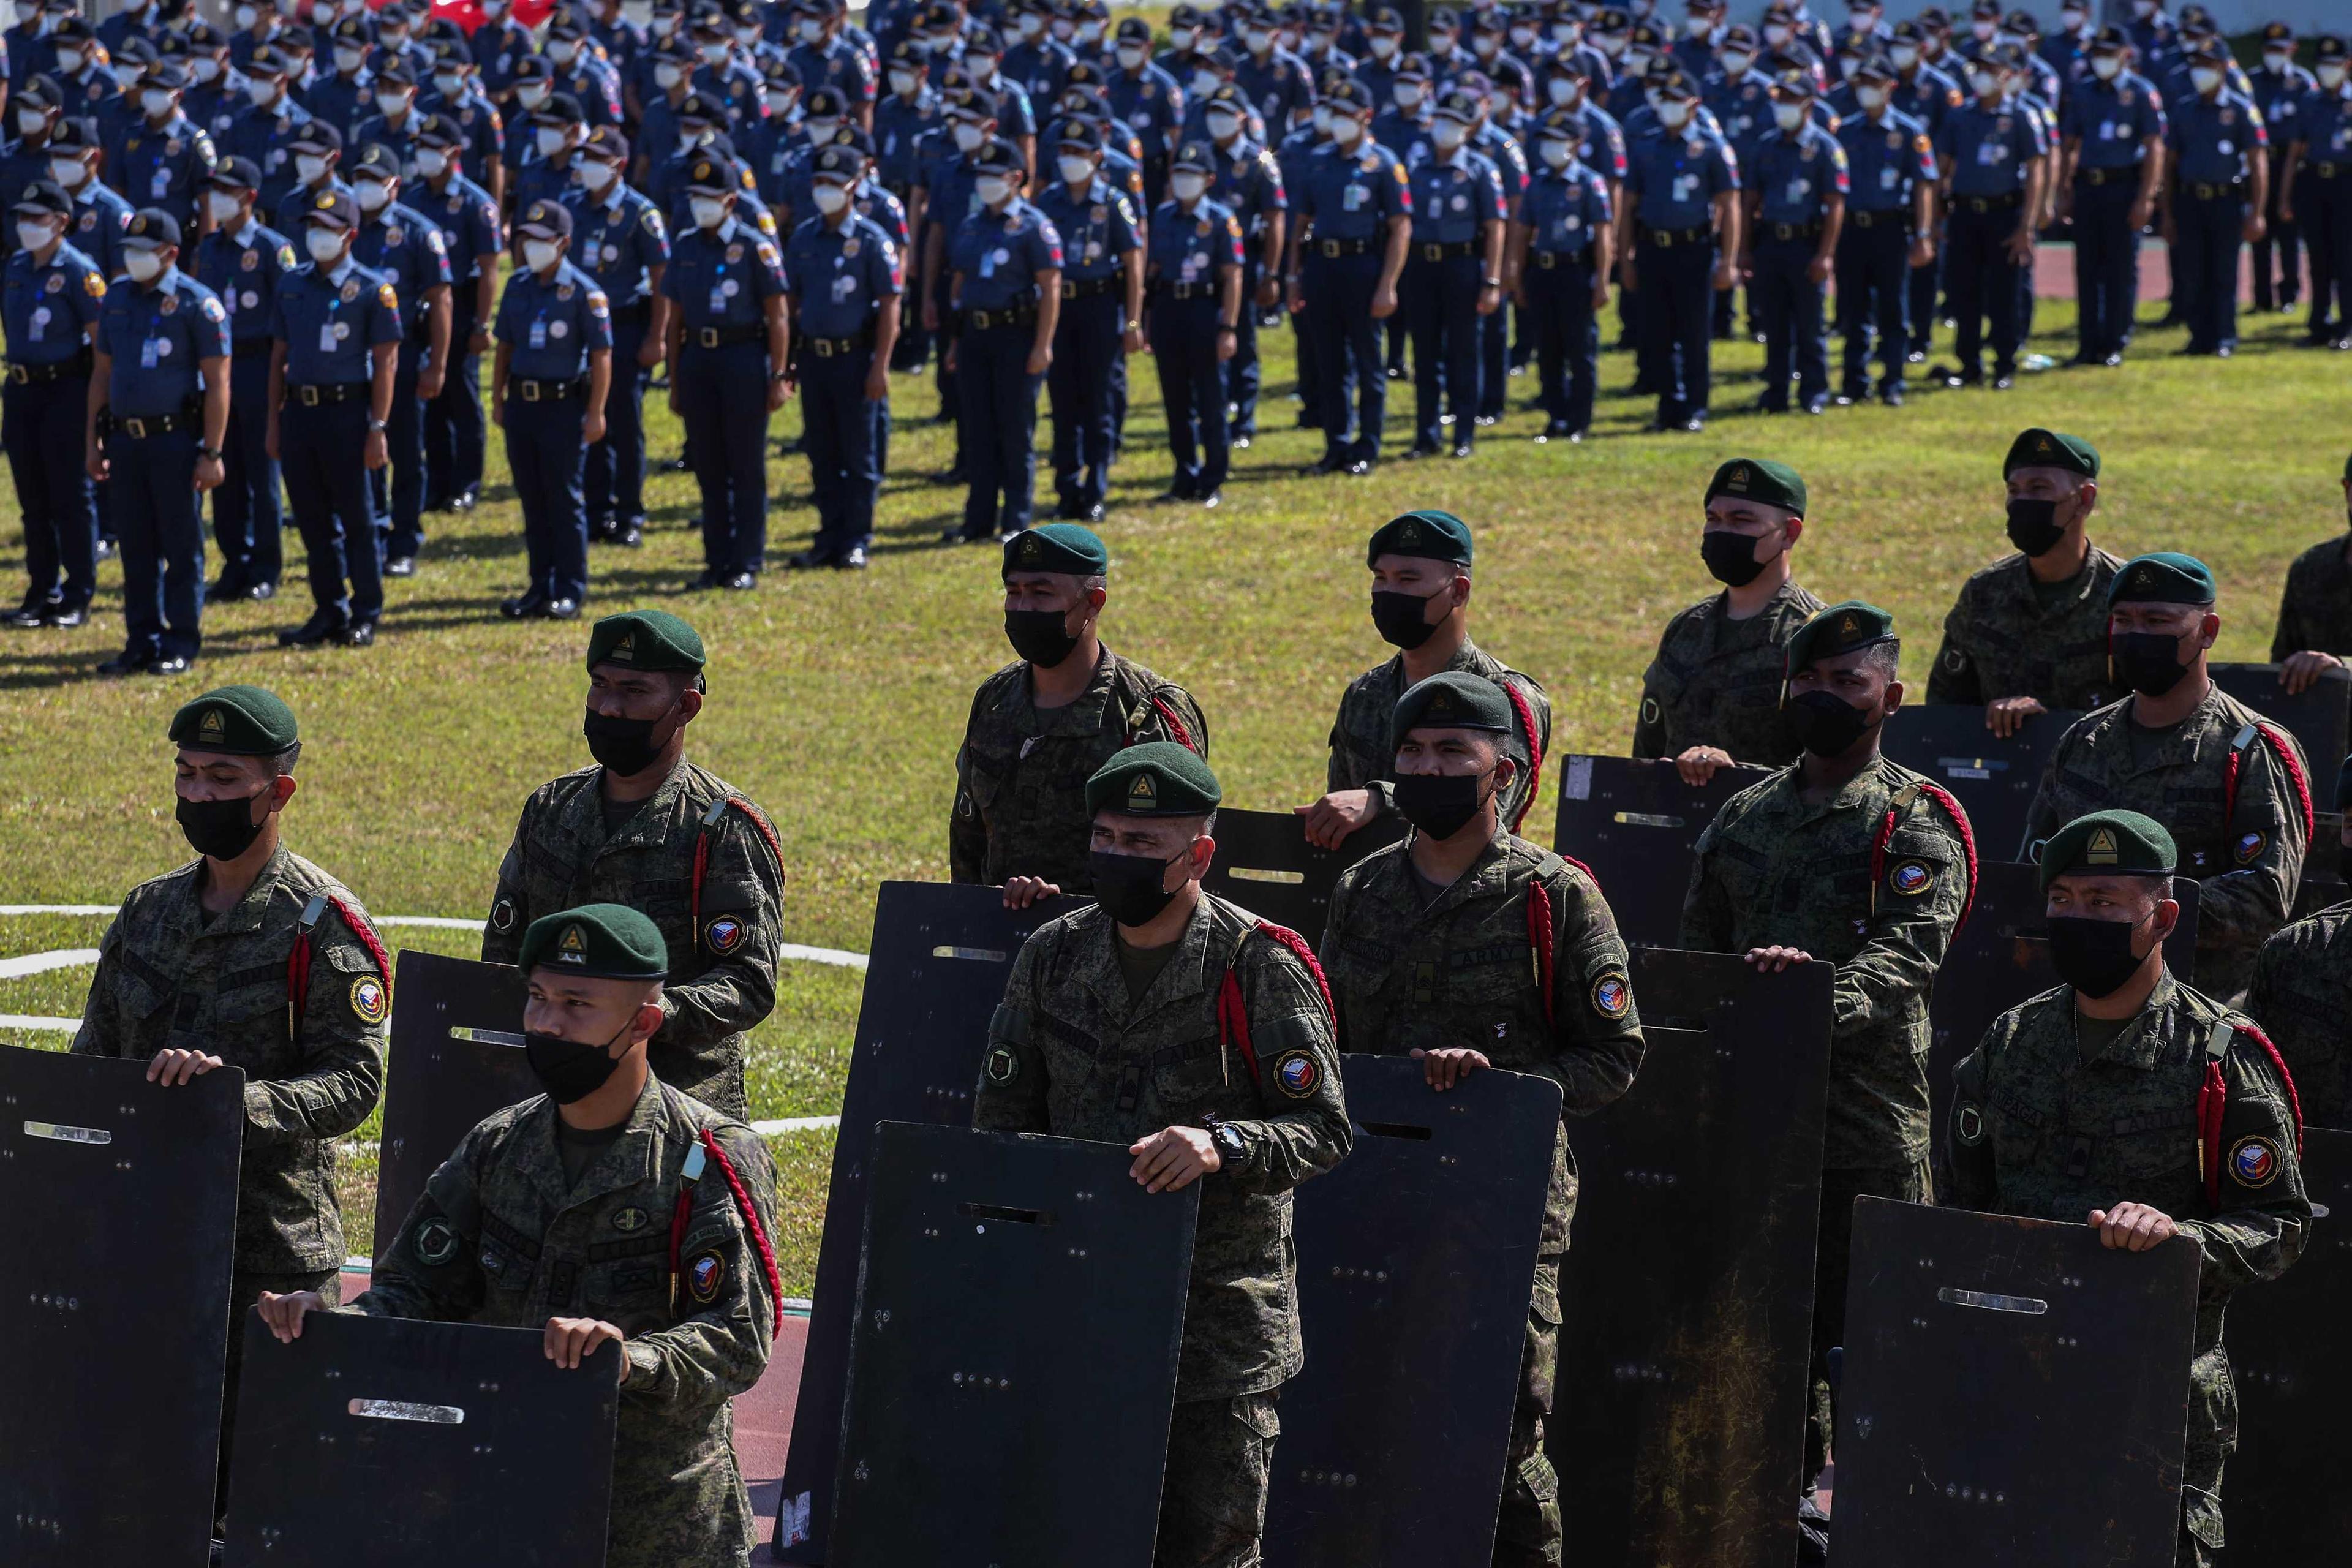 Members of the Philippine military and police services attend a ceremonial send-off as they are deployed for security duty ahead of the May 9 presidential election, at Camp Crame in Quezon City, suburban Manila on May 4. Photo: AFP 